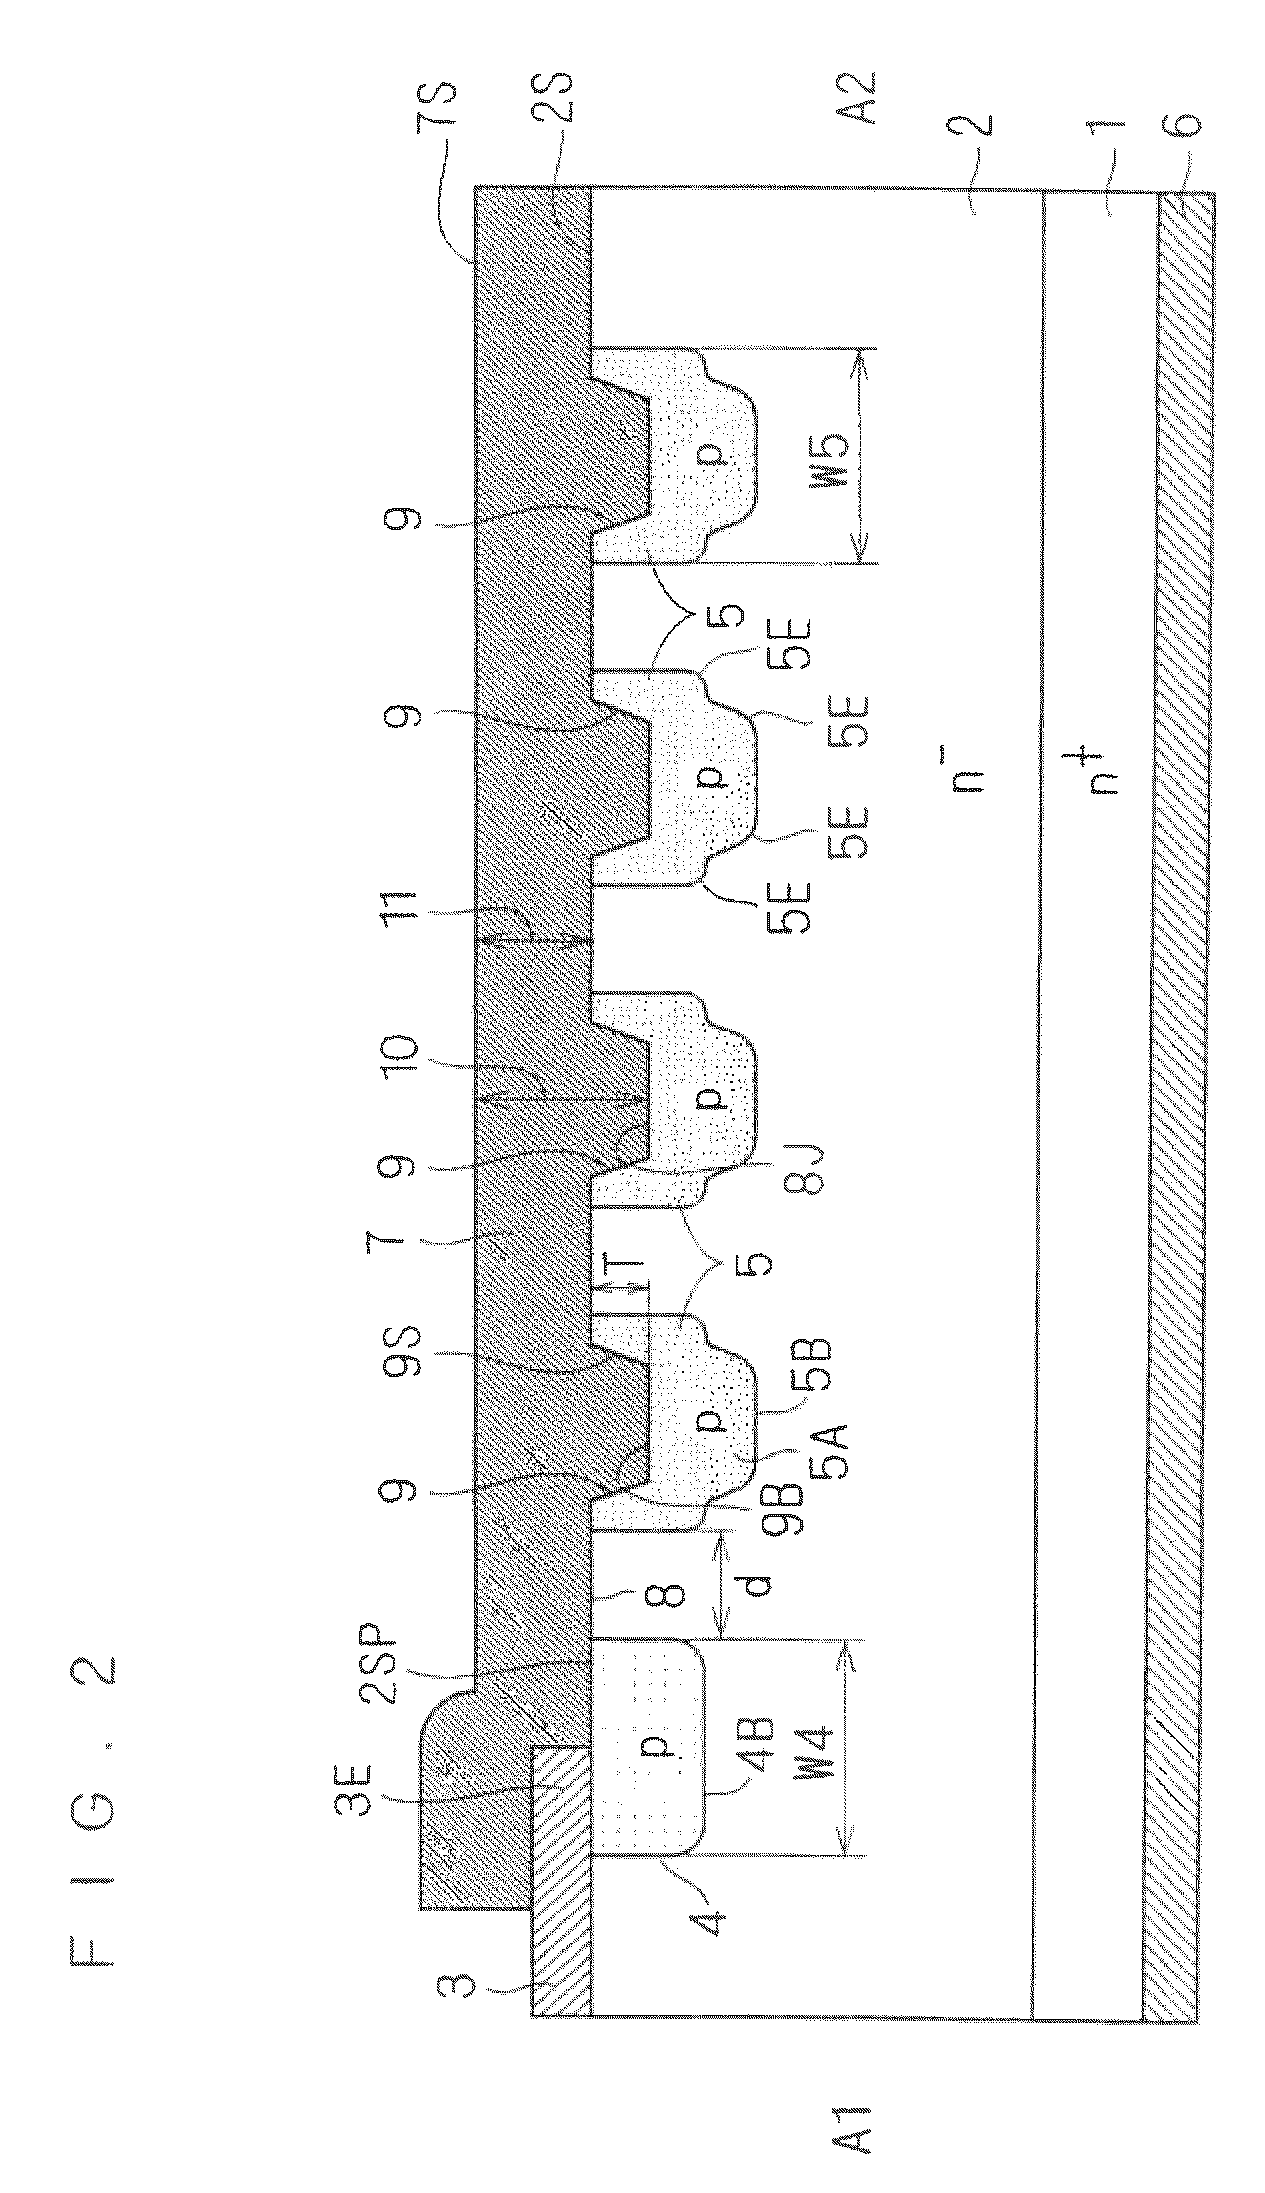 Semiconductor device having a groove and a junction termination extension layer surrounding a guard ring layer